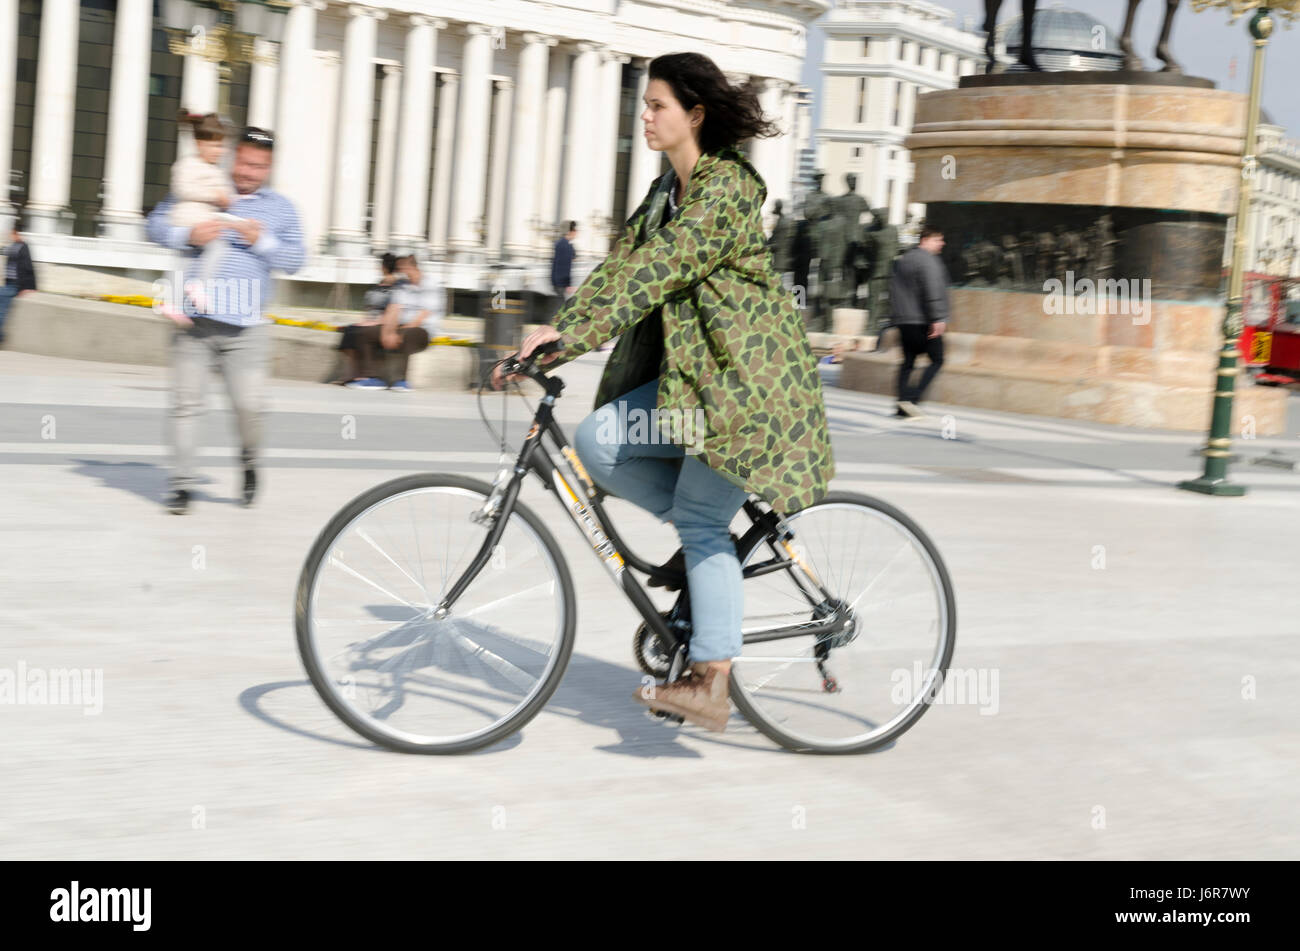 Woman with camouflage raincoat riding bicycle in Skopje square. Stock Photo